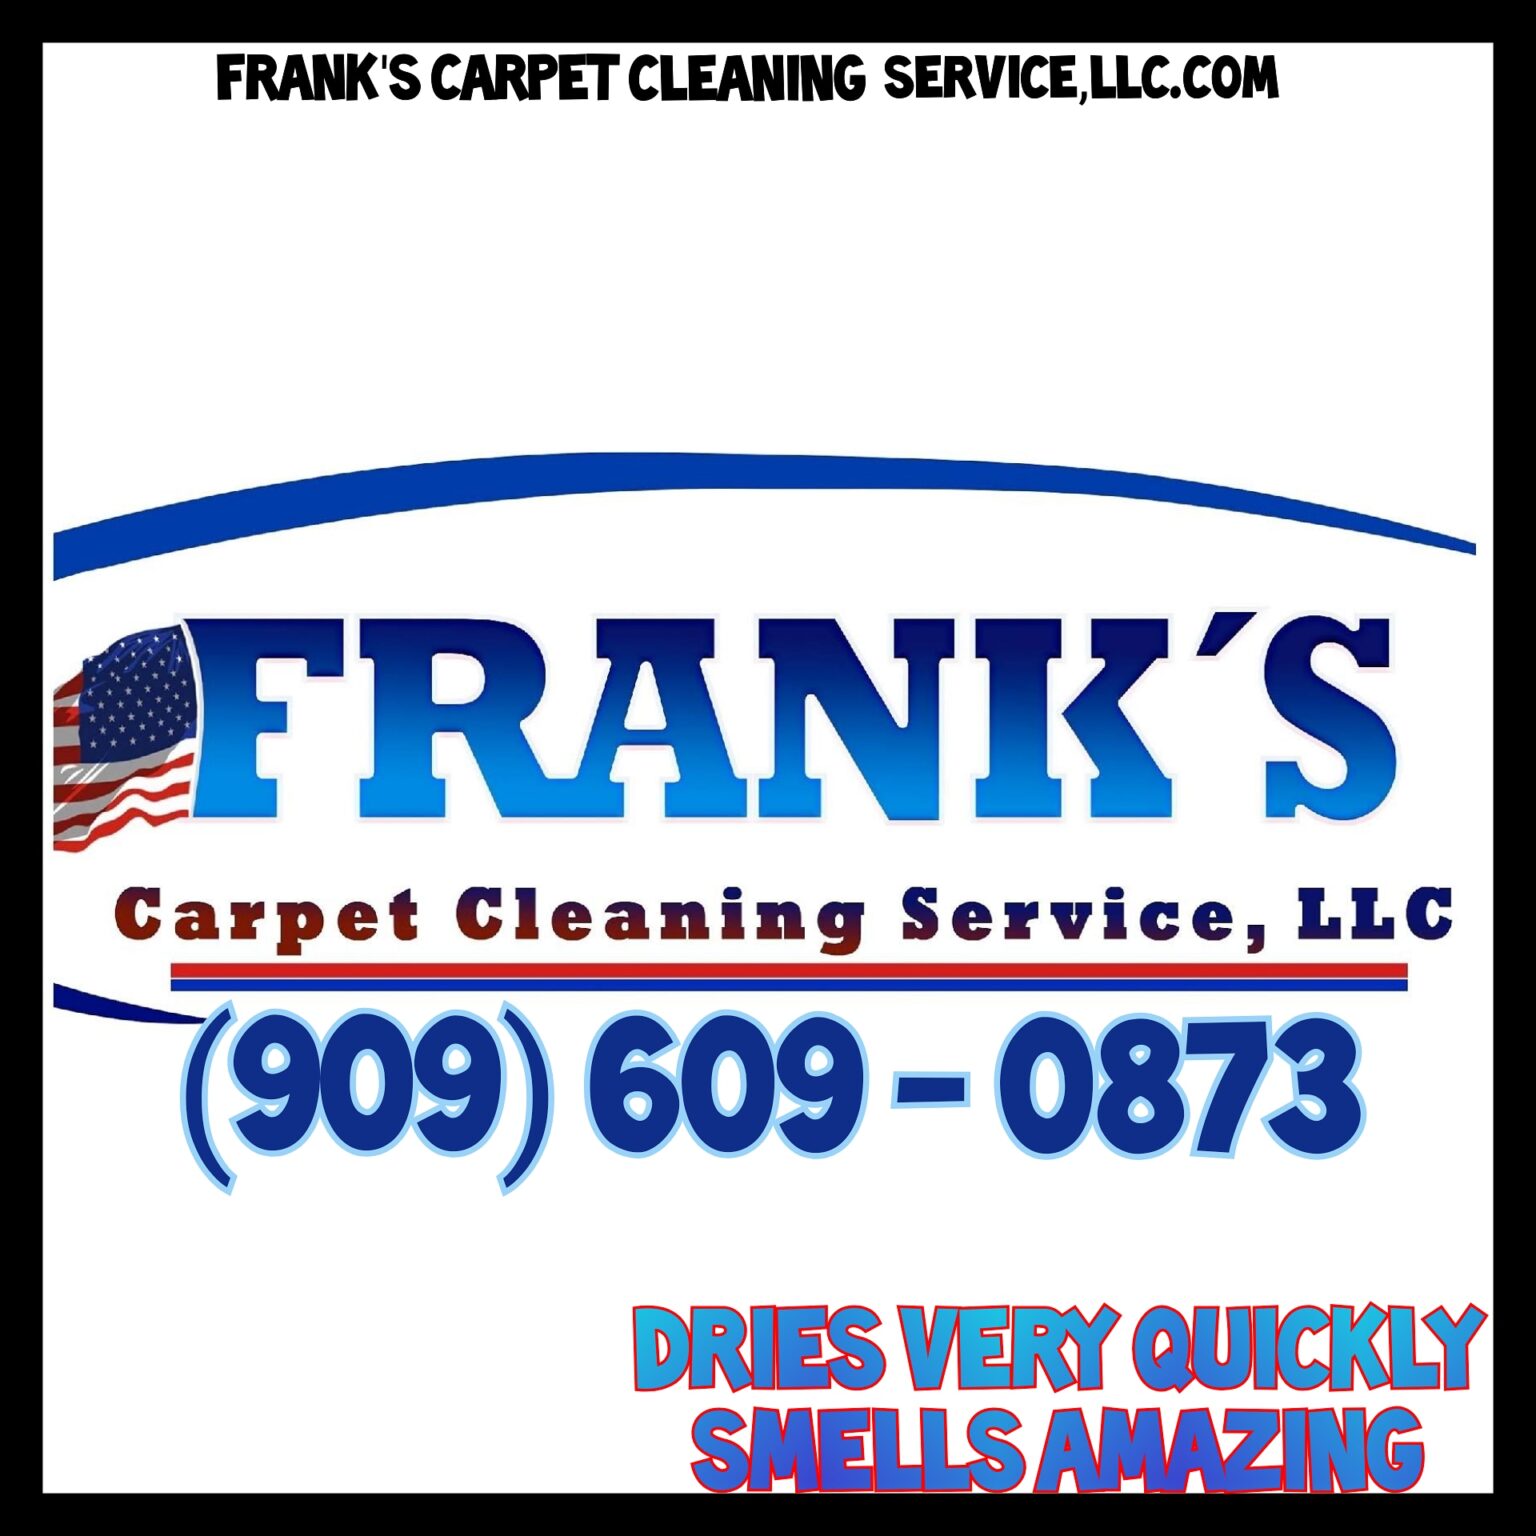 Frank Carpet Cleaning Service, LLC – Just another WordPress site